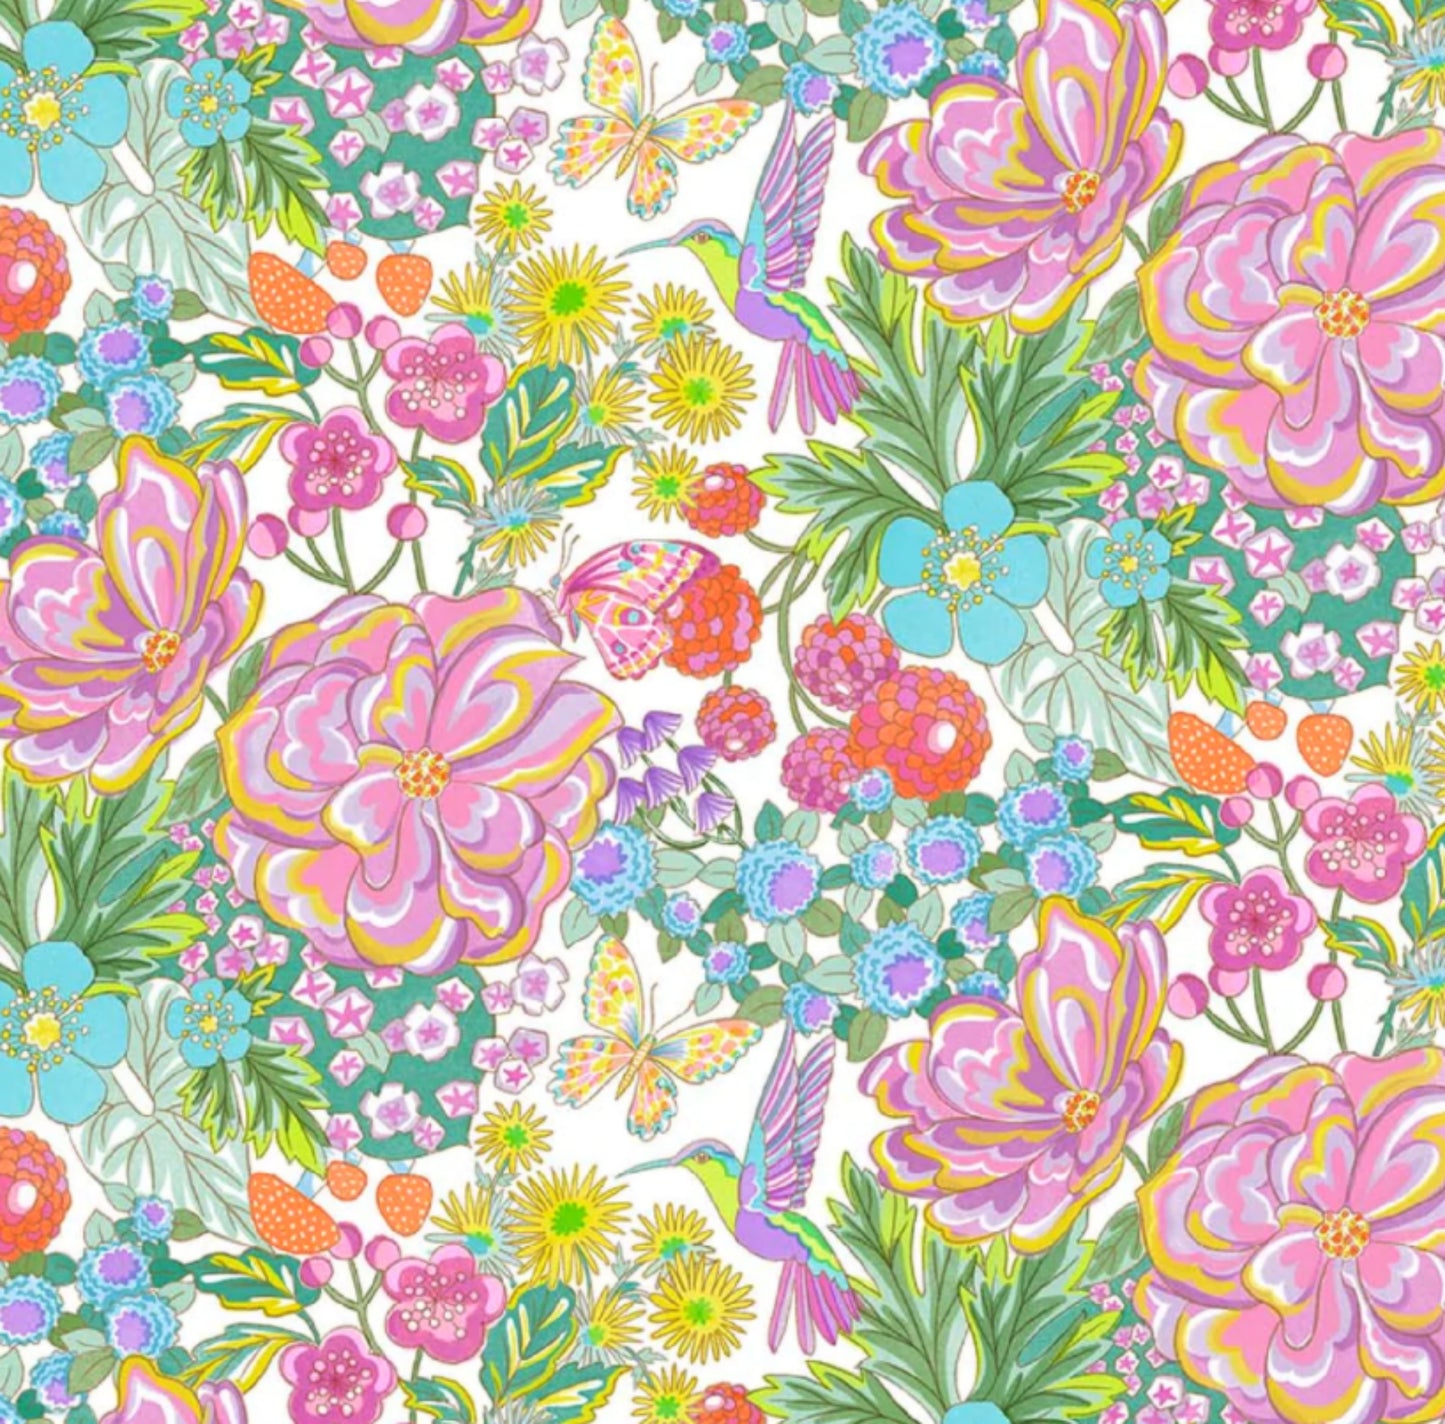 Floral Oasis Fabric from the Magic Garden Collection from Figo Fabrics.